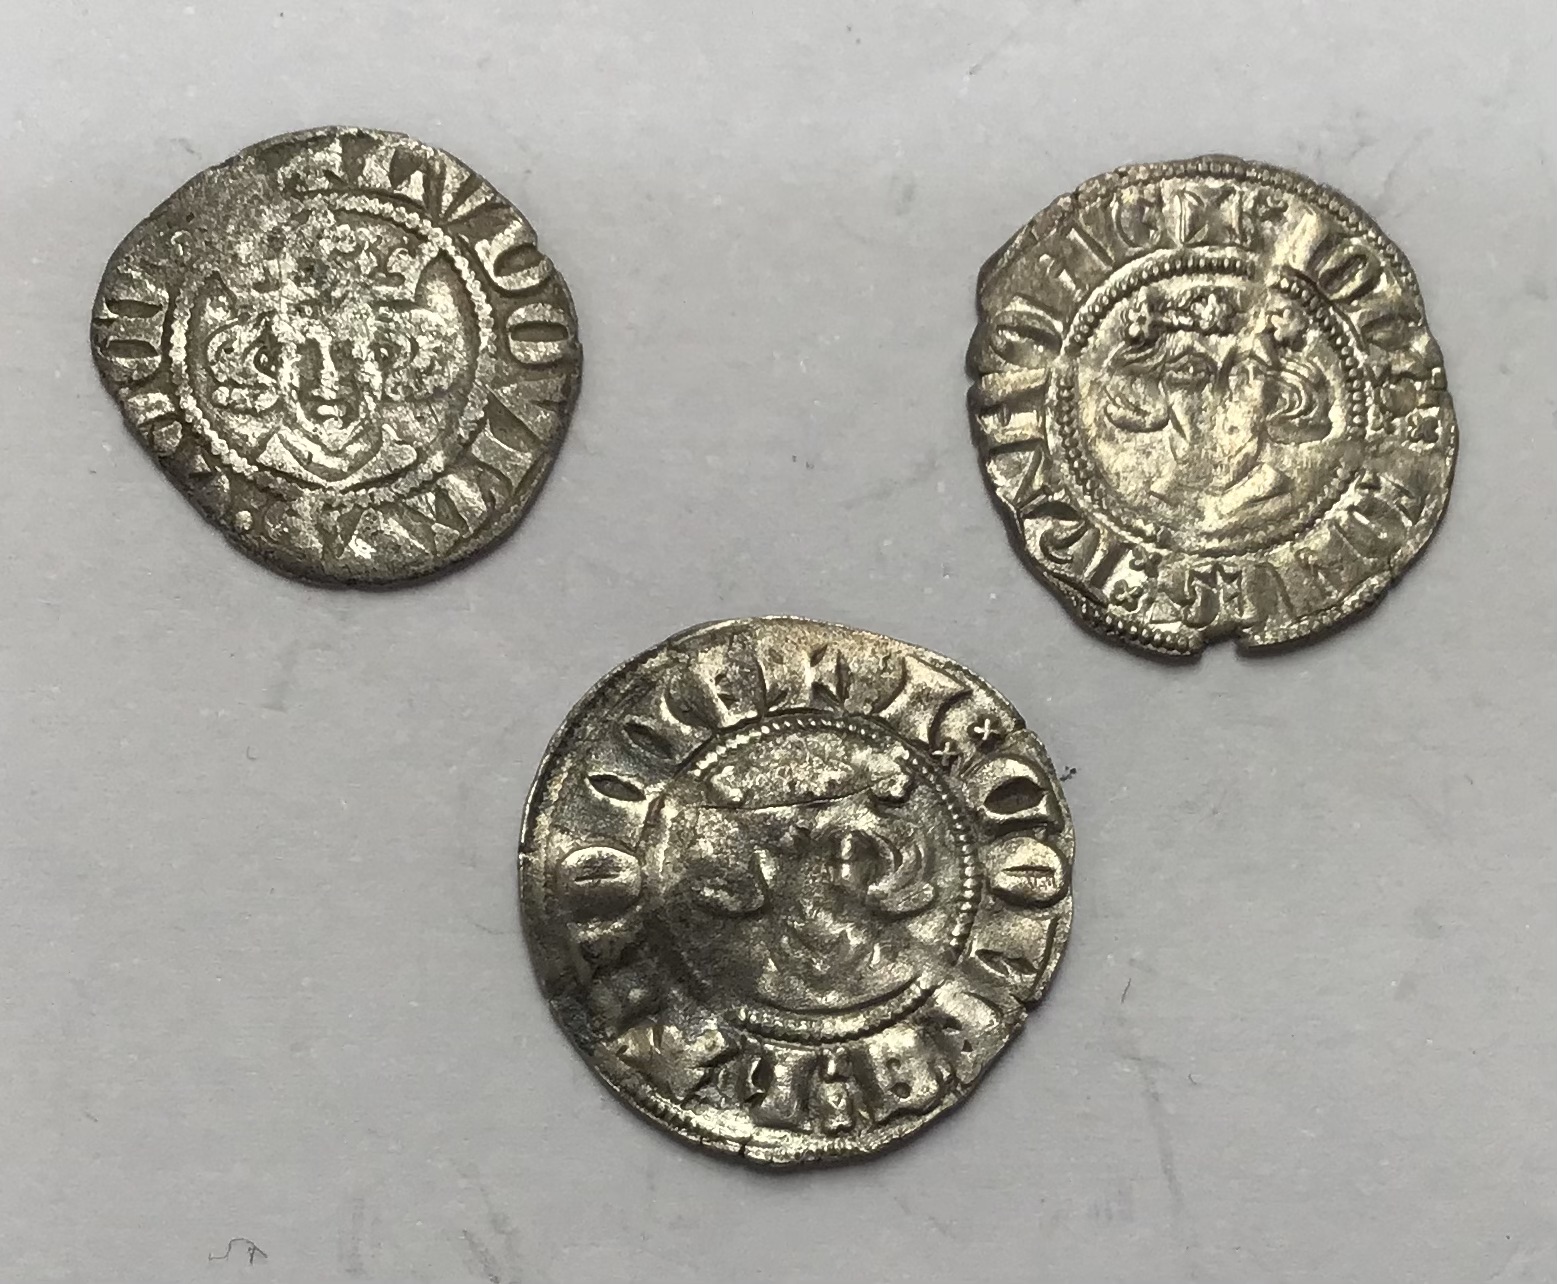 Sterling Silver Imitation Penny’s of Louis of Nevers & two John of Avesnes.